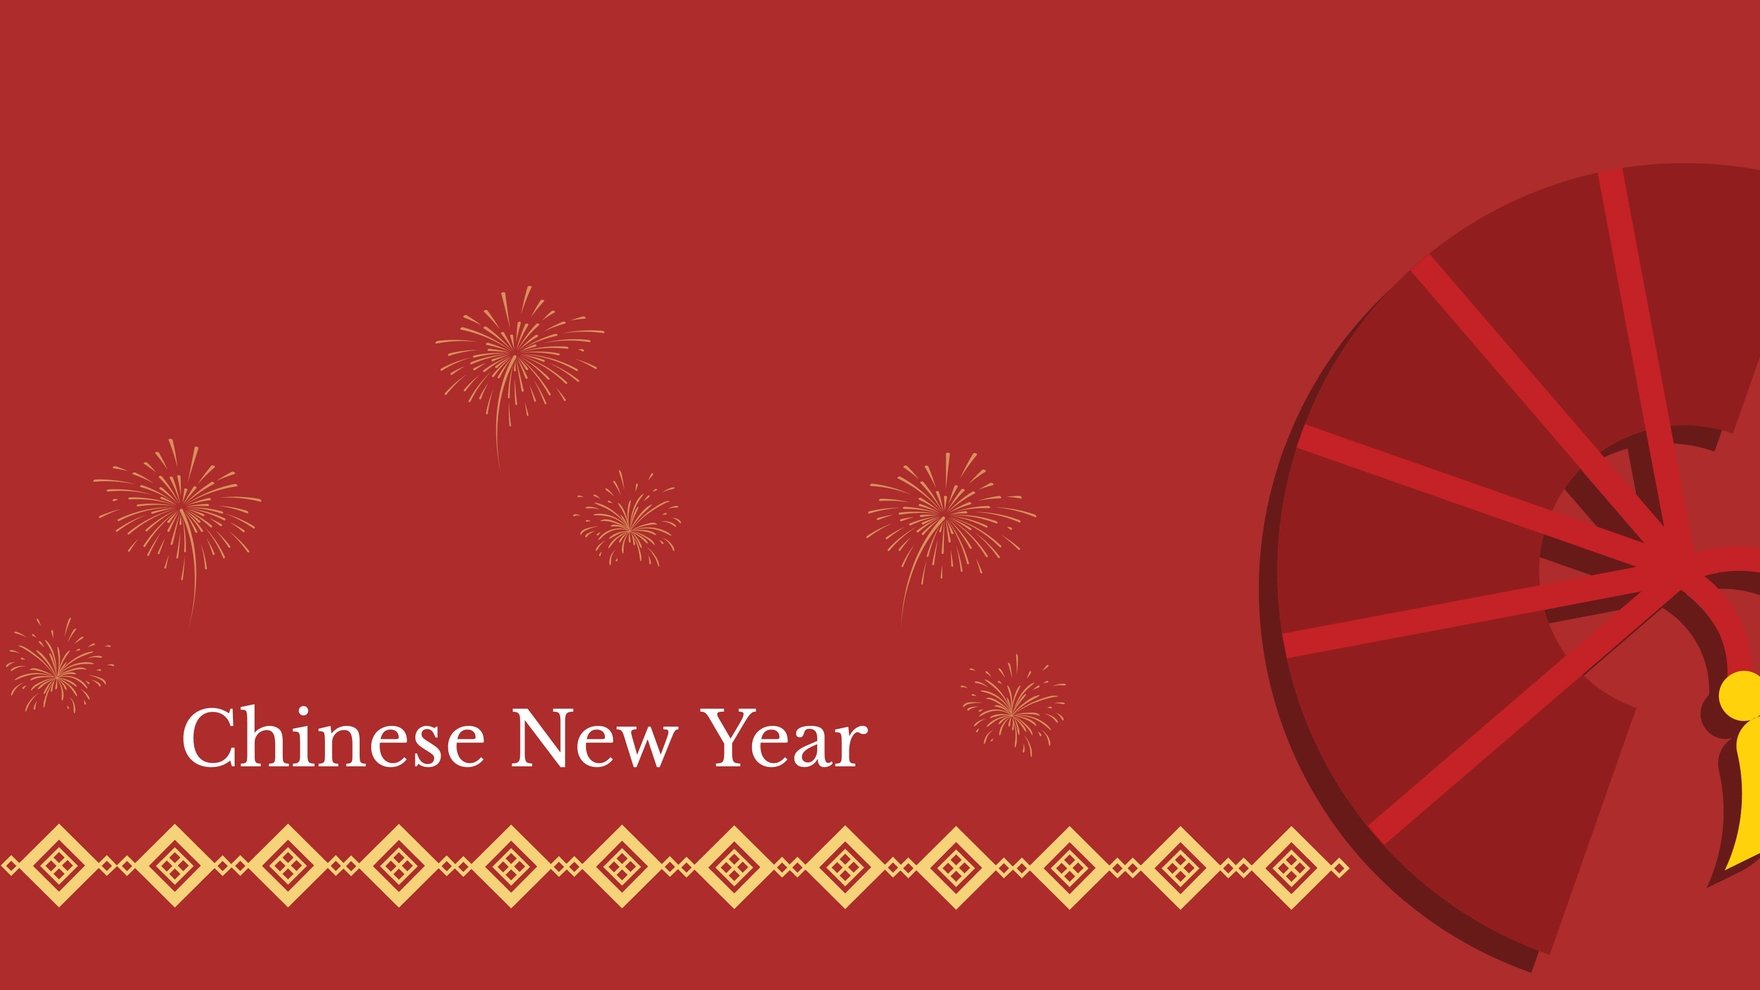 Free Chinese New Year Vector Background